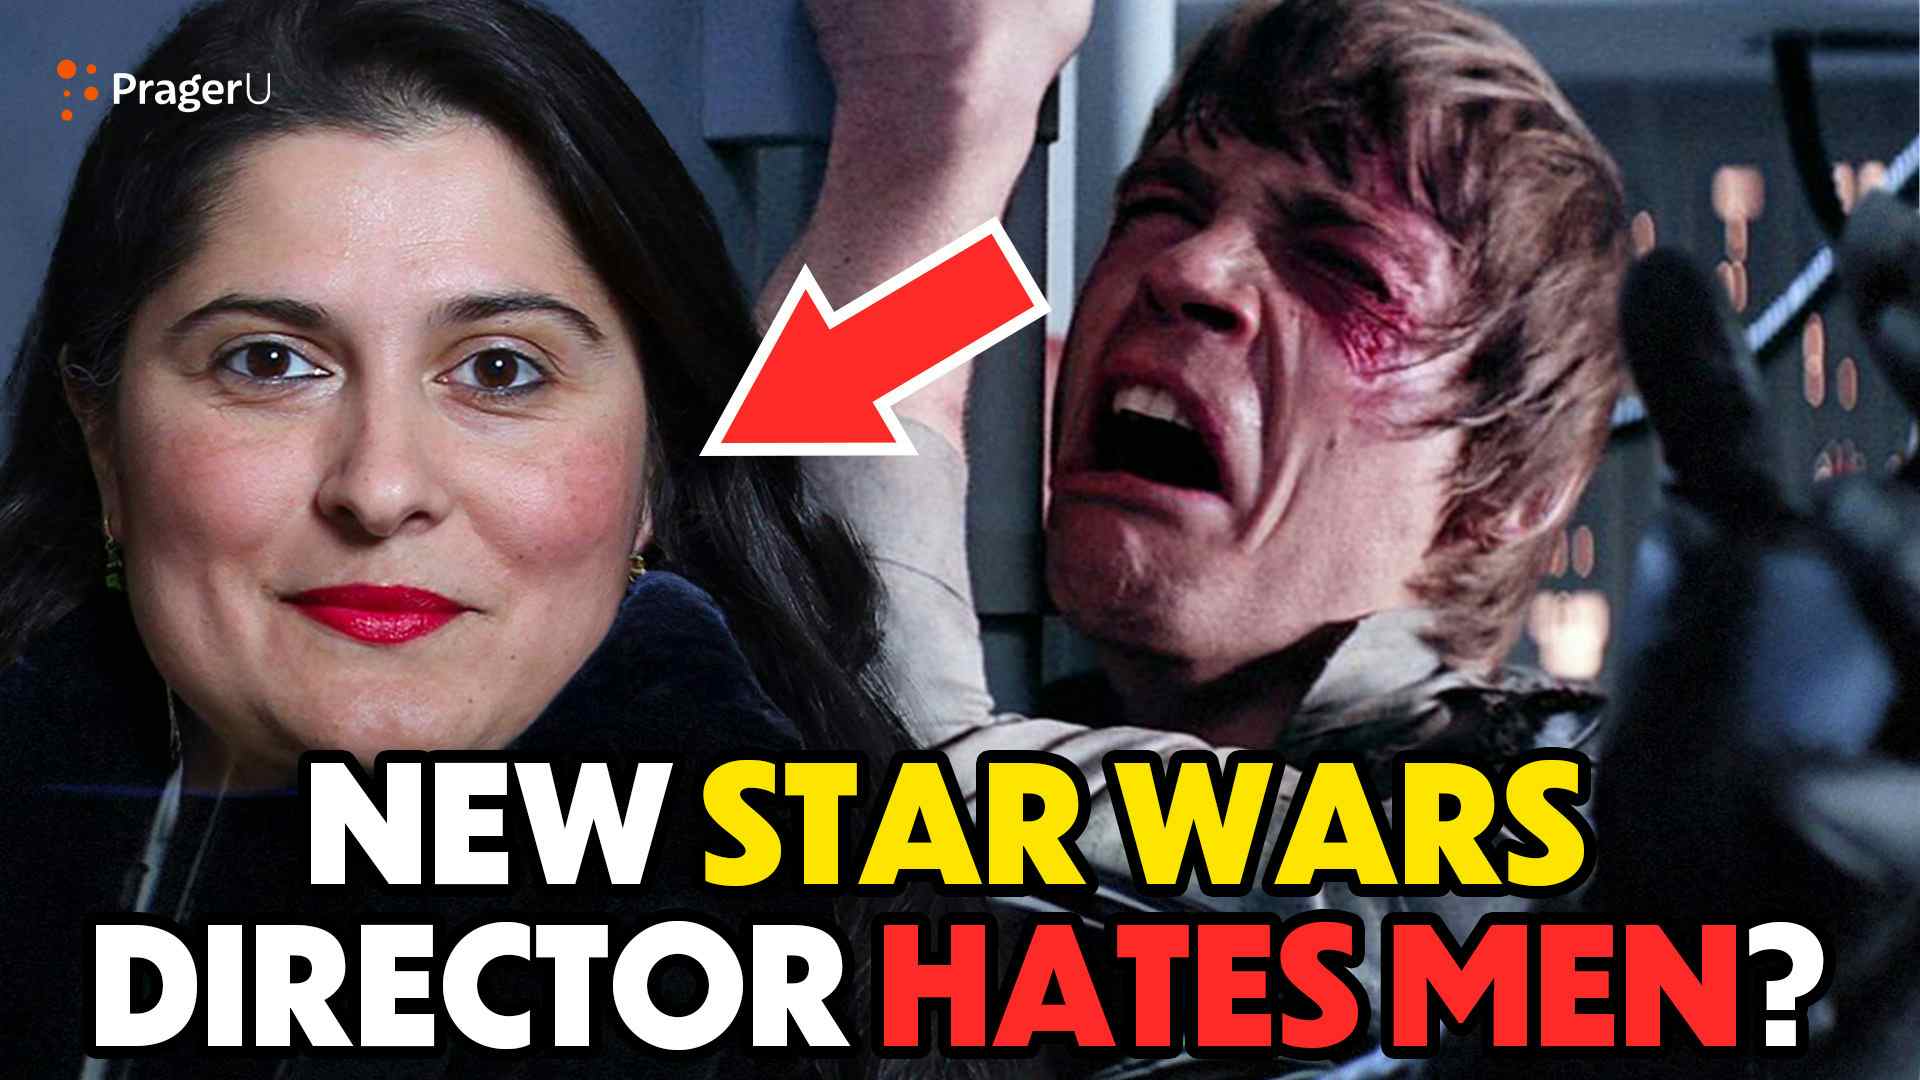 Director of Upcoming Star Wars Movie Wants Male Moviegoers to Feel “Uncomfortable.”